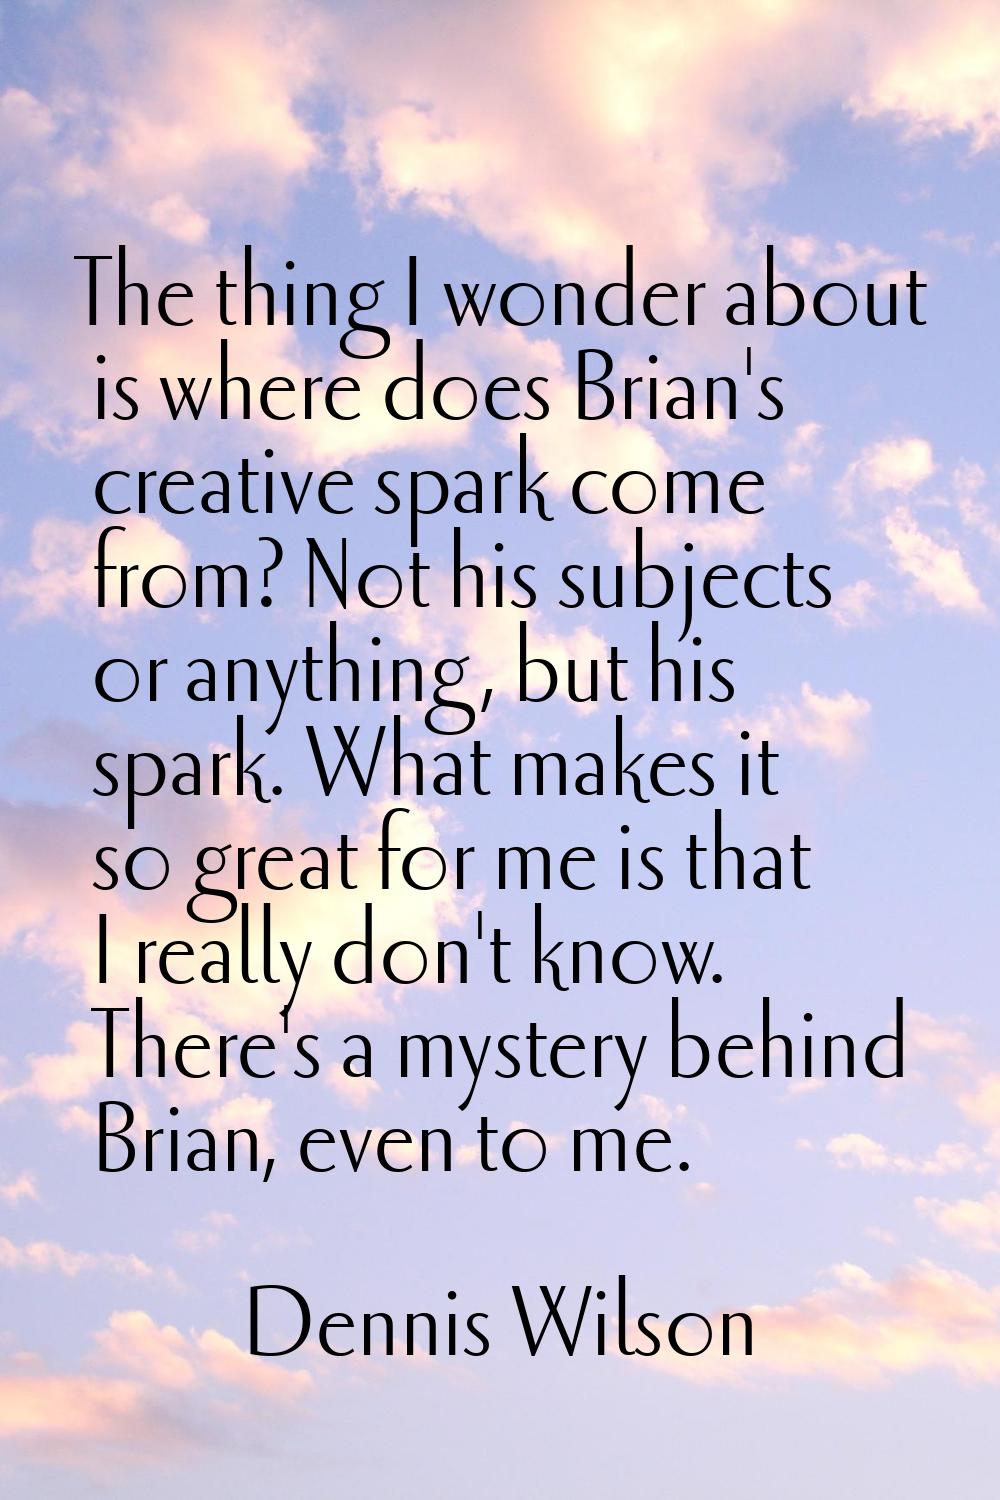 The thing I wonder about is where does Brian's creative spark come from? Not his subjects or anythi